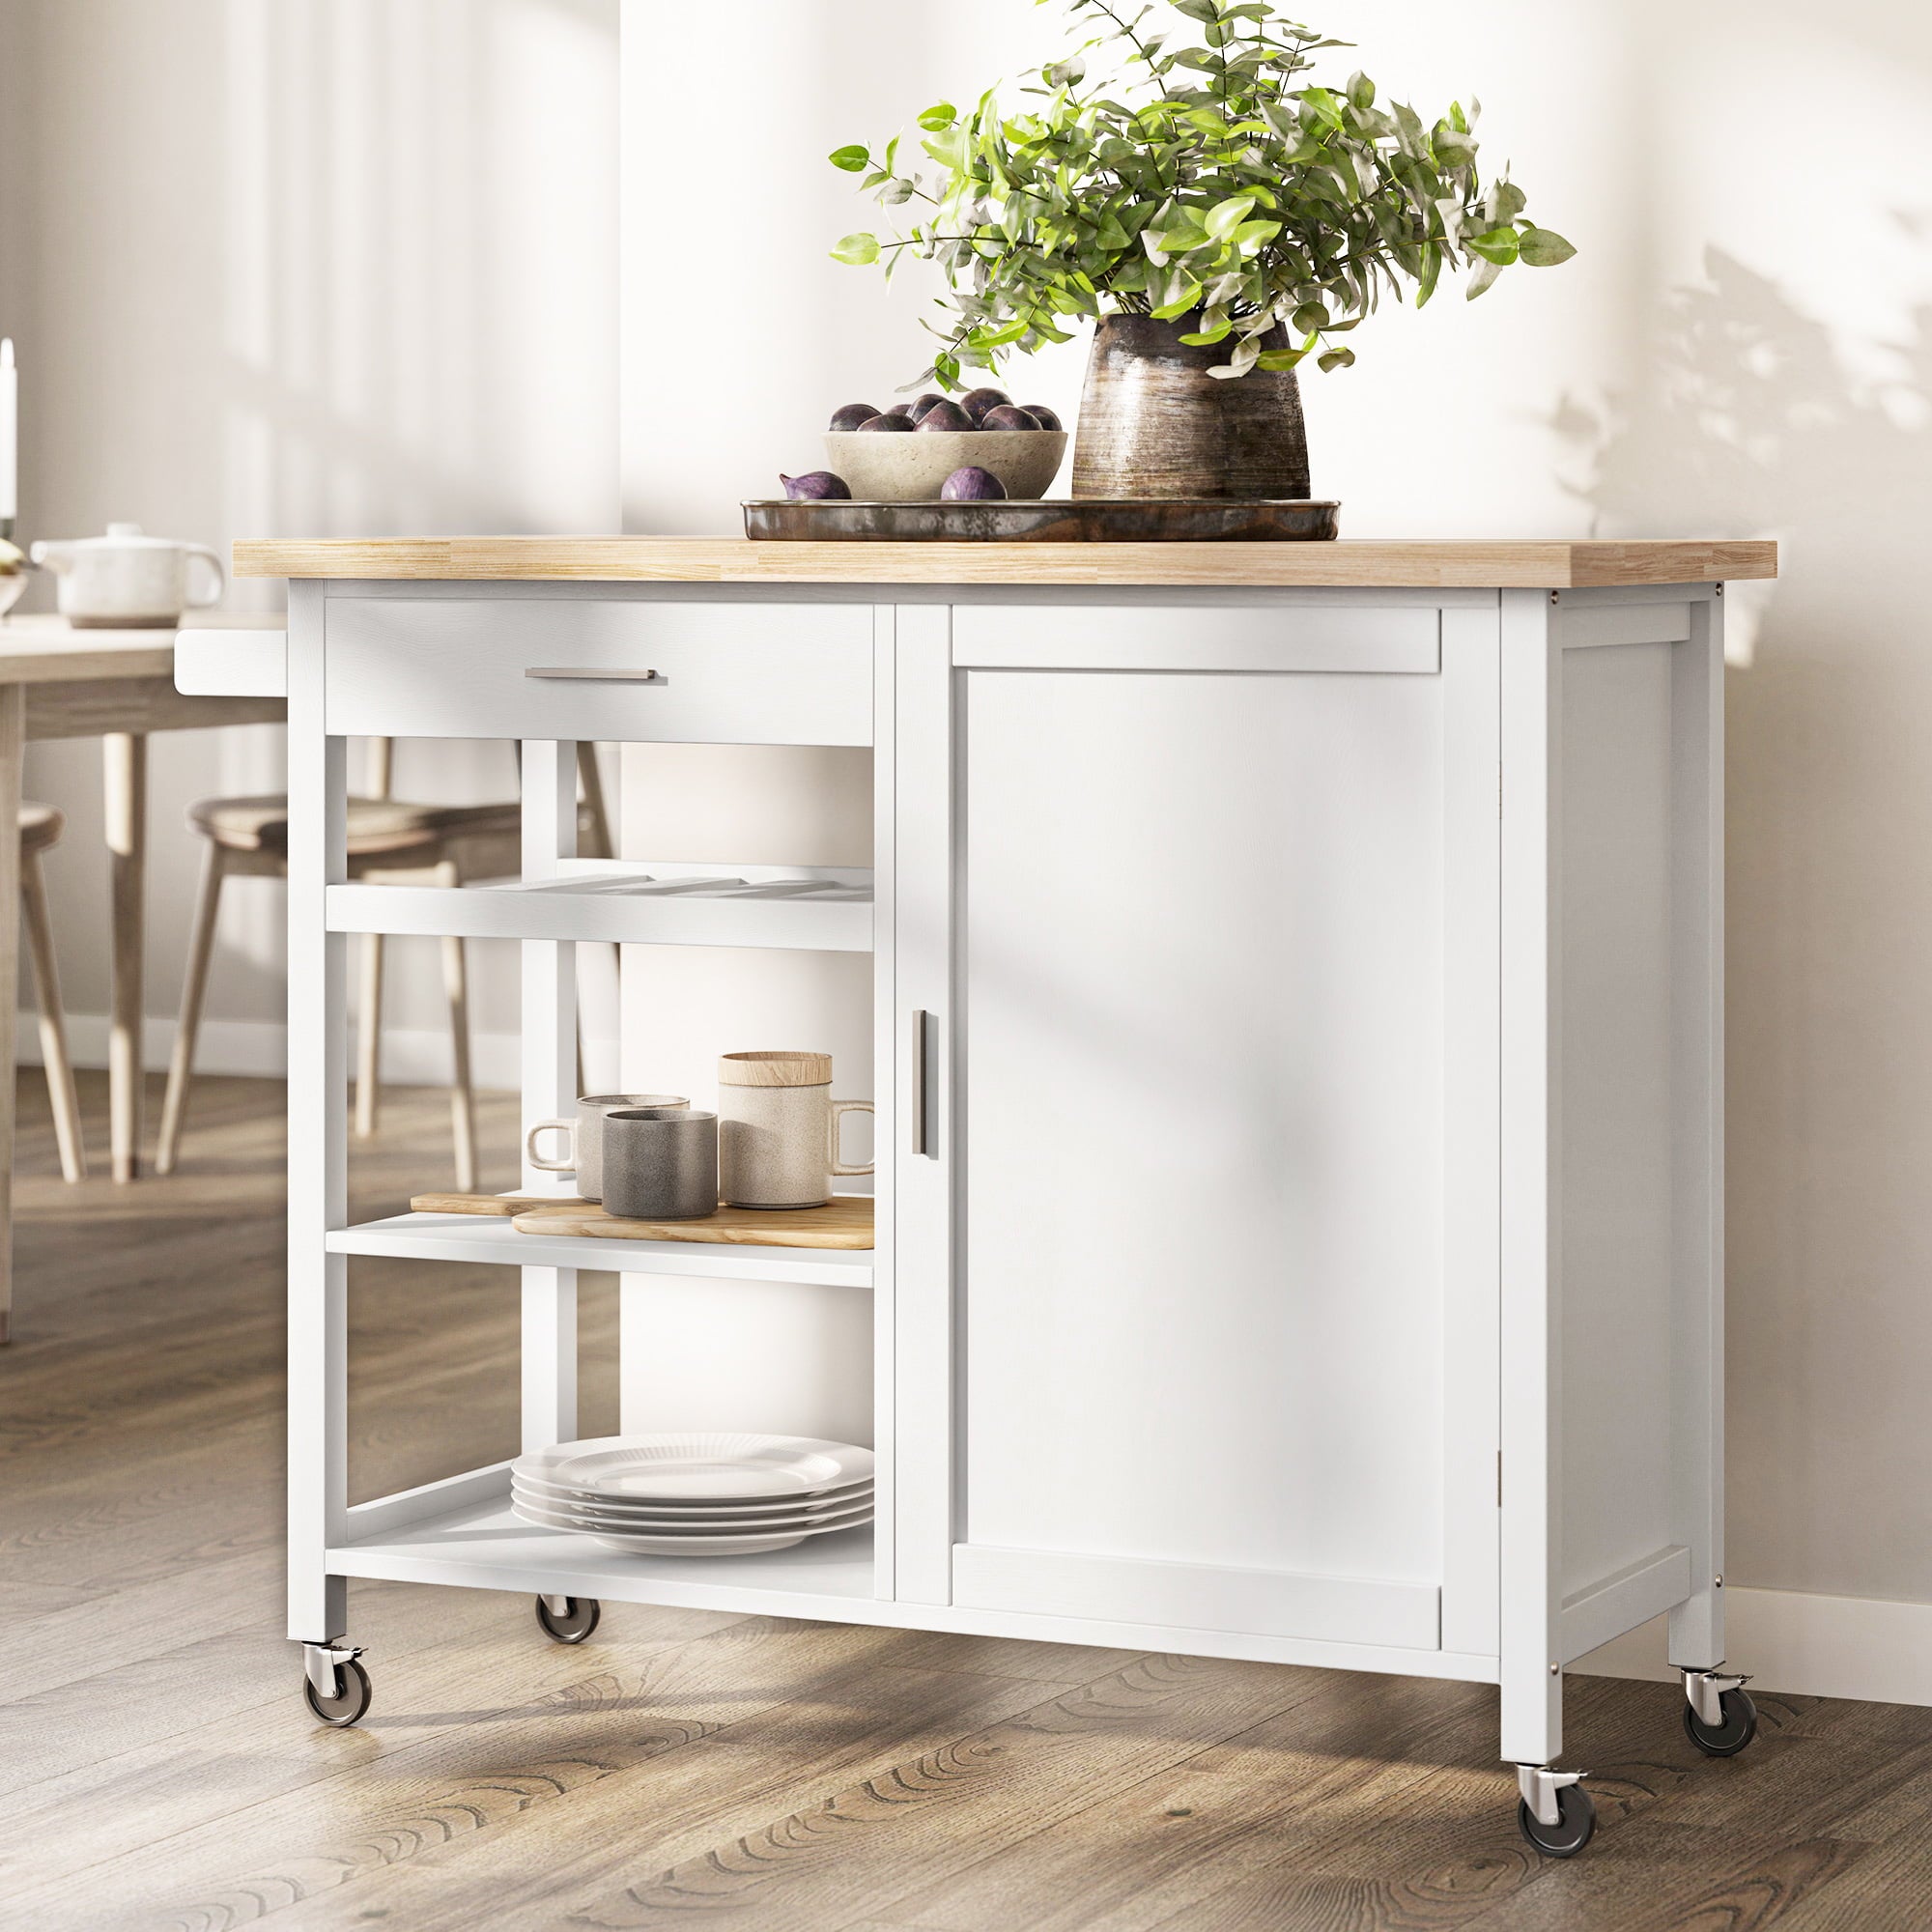 BELLEZE Rolling Kitchen Island Utility Cart with a Drawer- Sonoma (White)